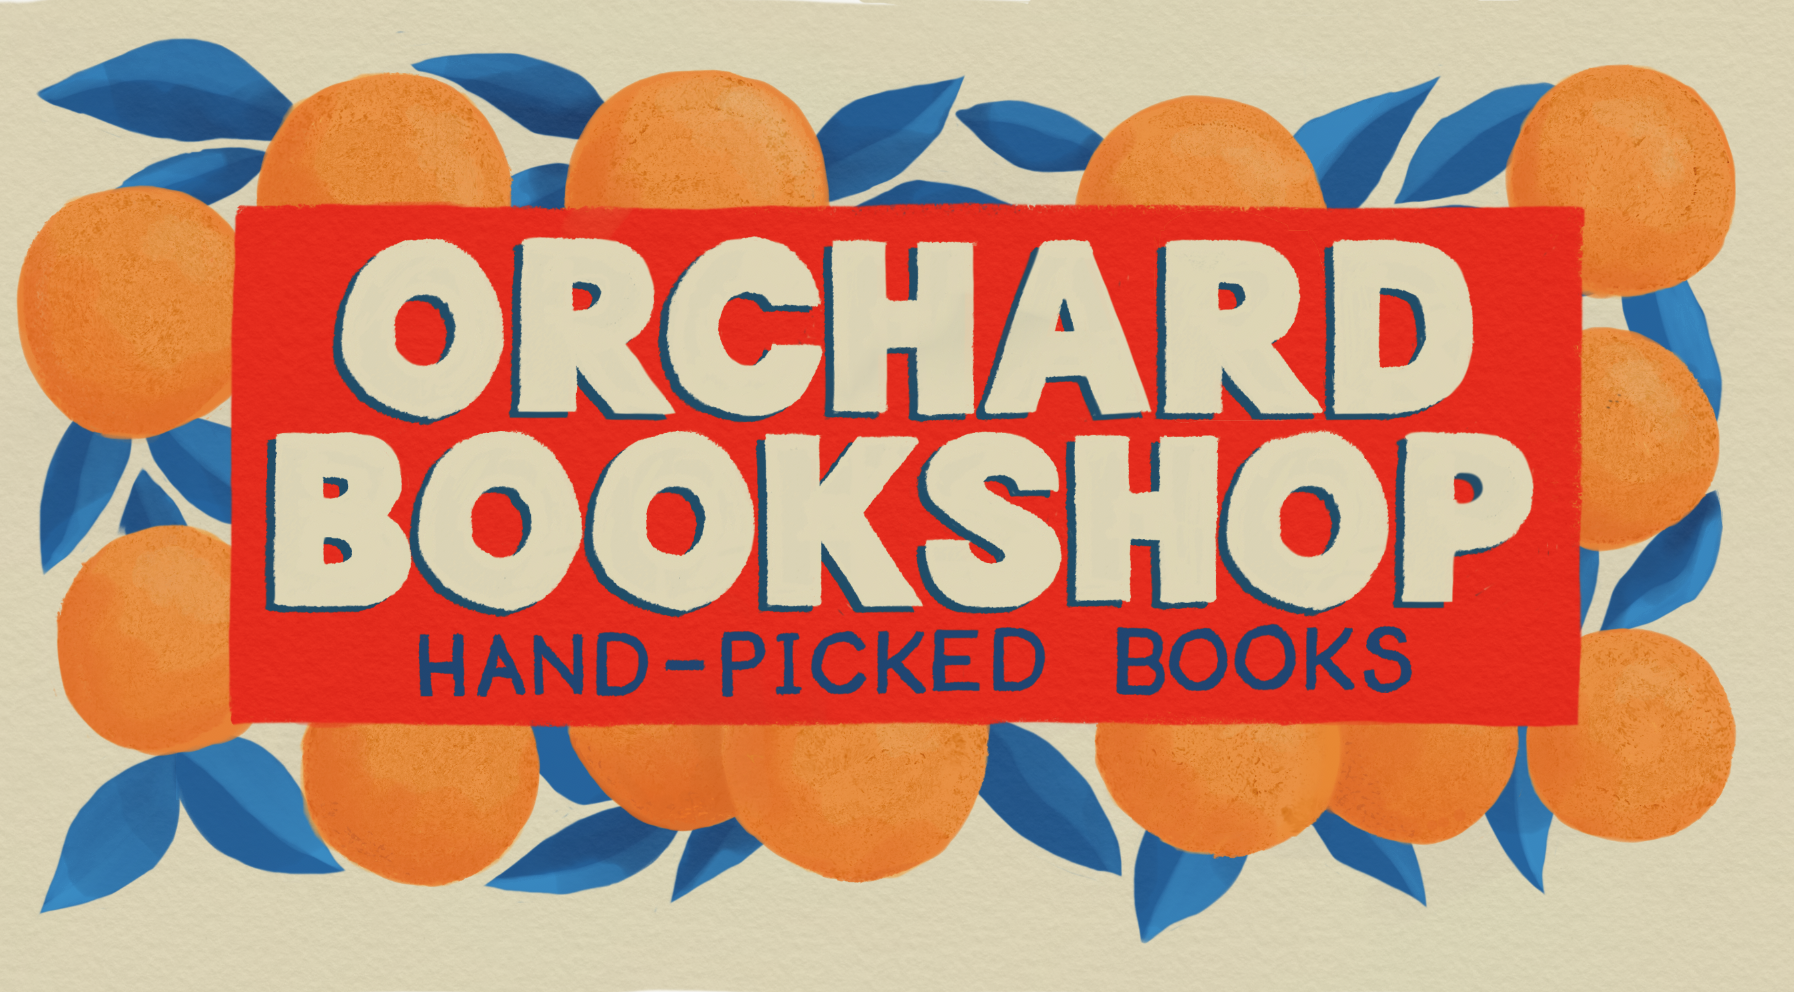 ORCHARD BOOKSHOP [hand-picked books]